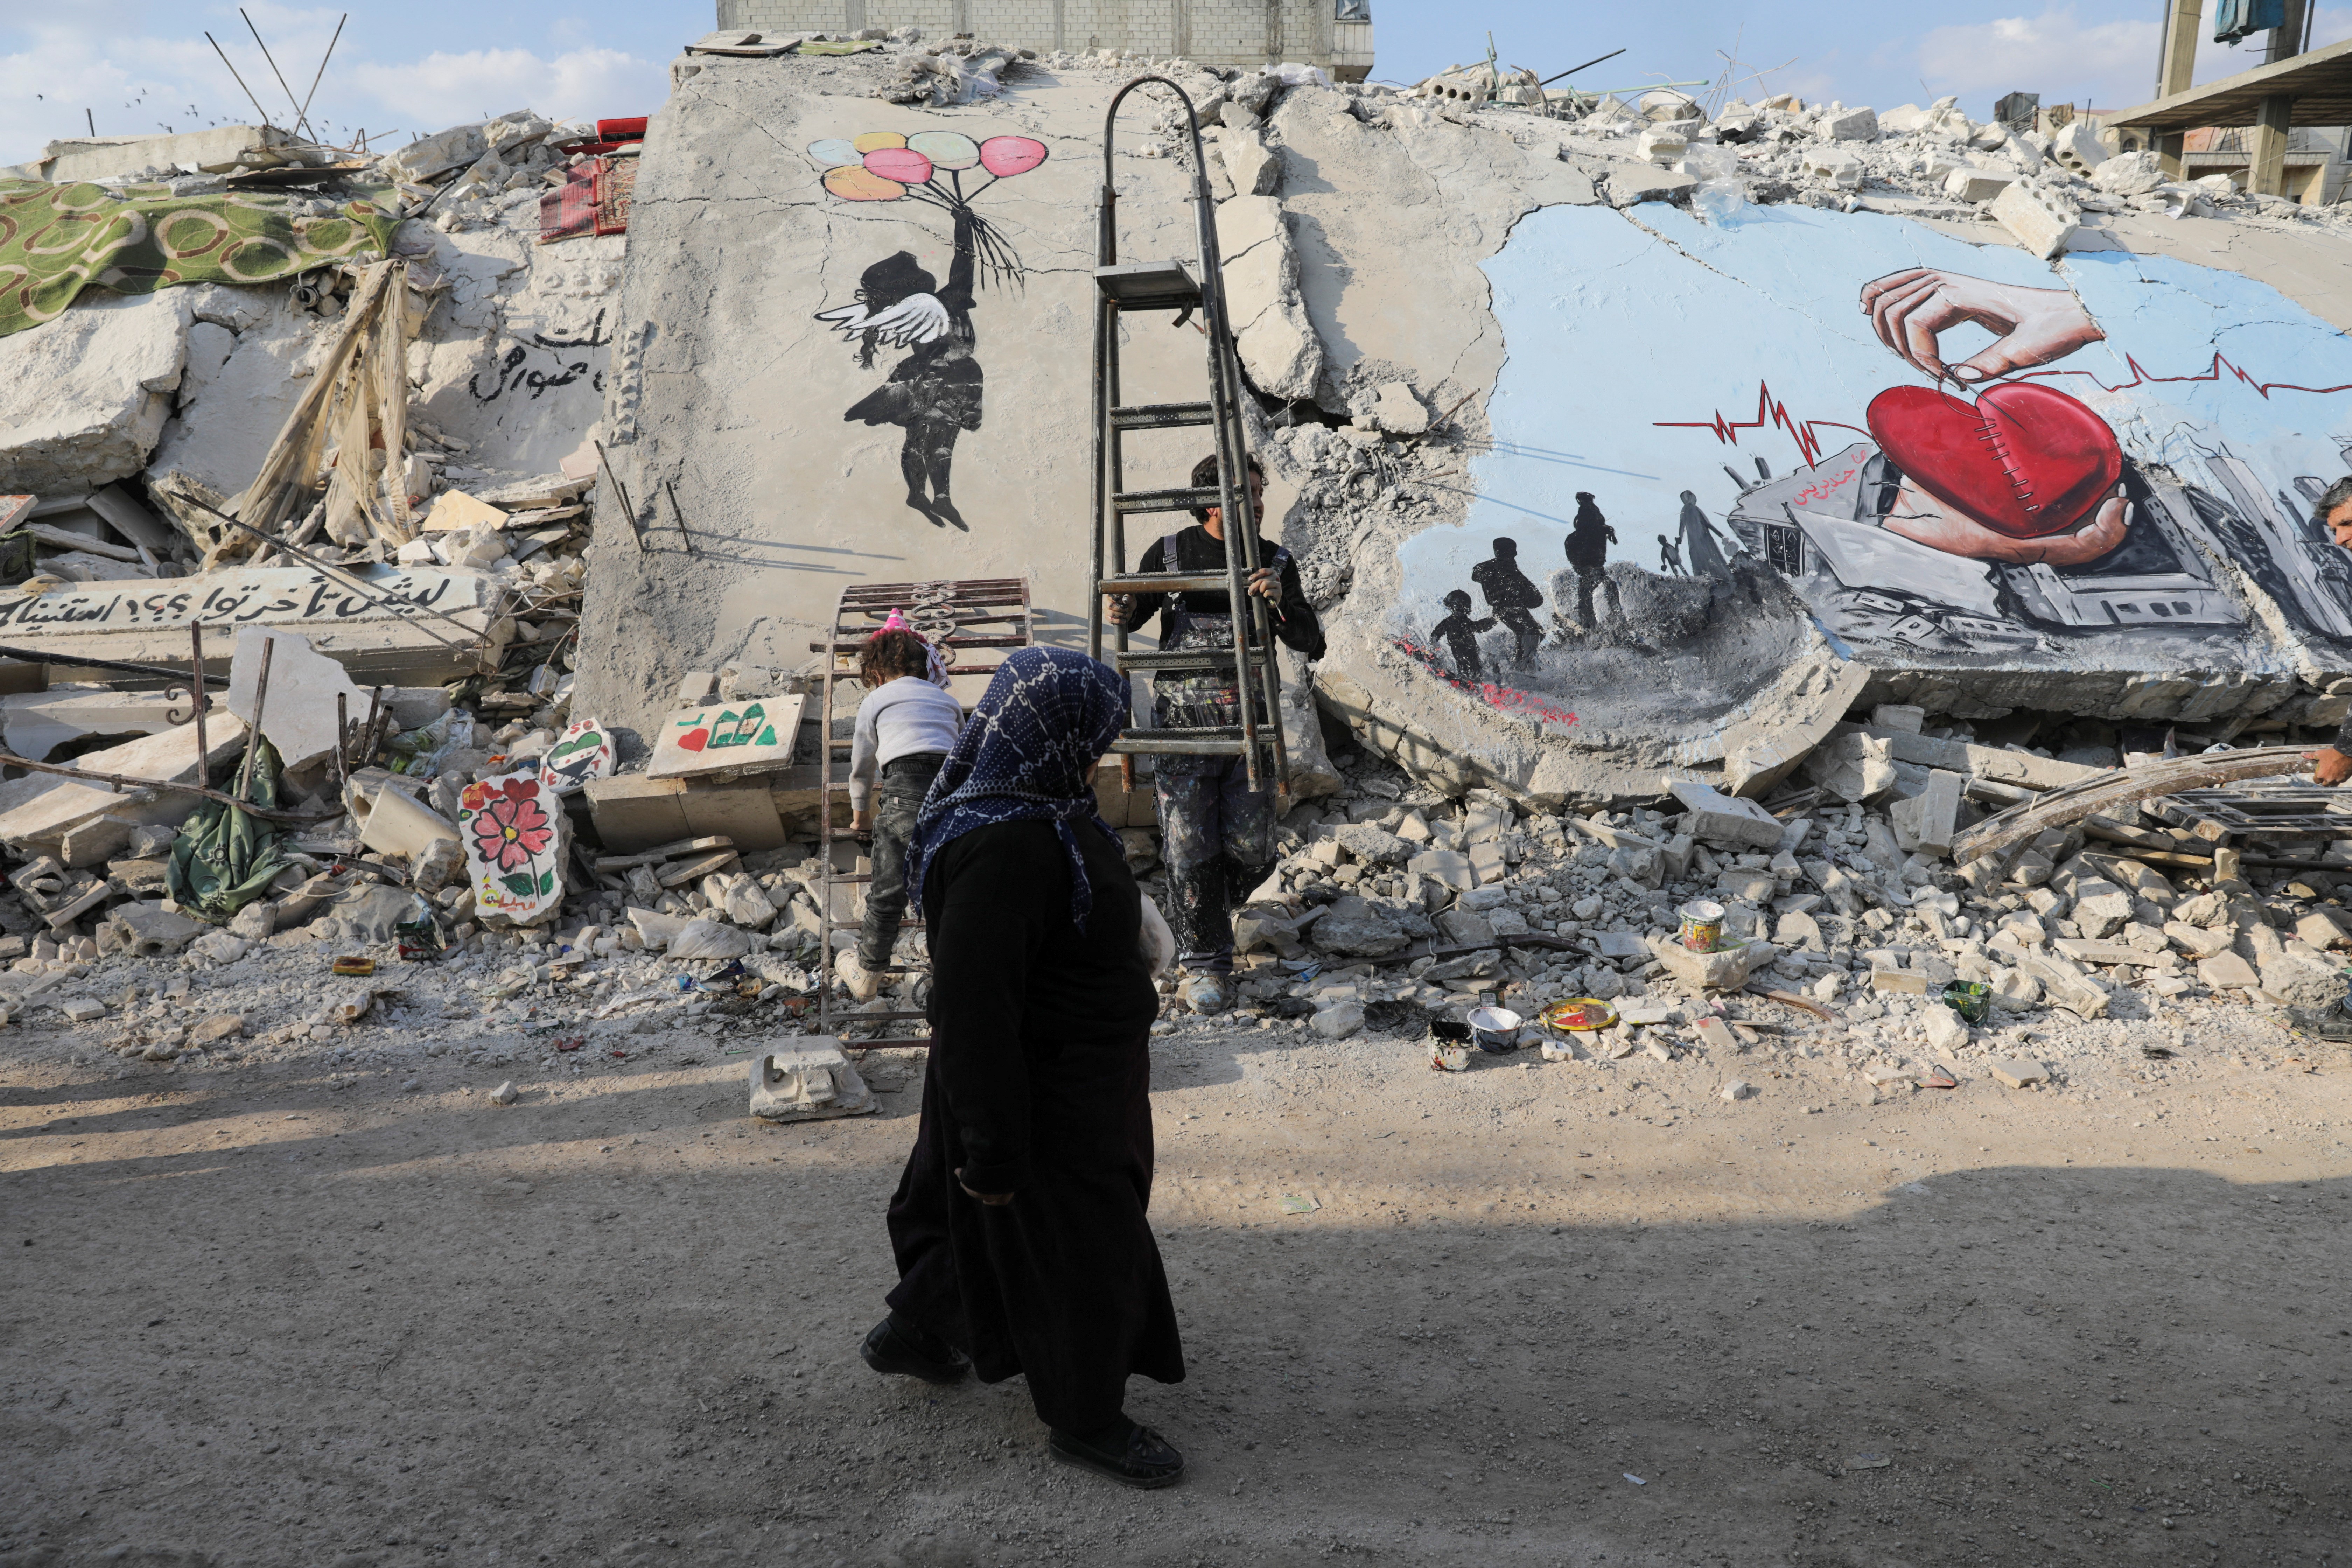 A woman walks past street art on the rubble of damaged buildings in the rebel-held town of Jandaris, in the aftermath of a deadly earthquake, in Syria February 22, 2023. Photo: Reuters